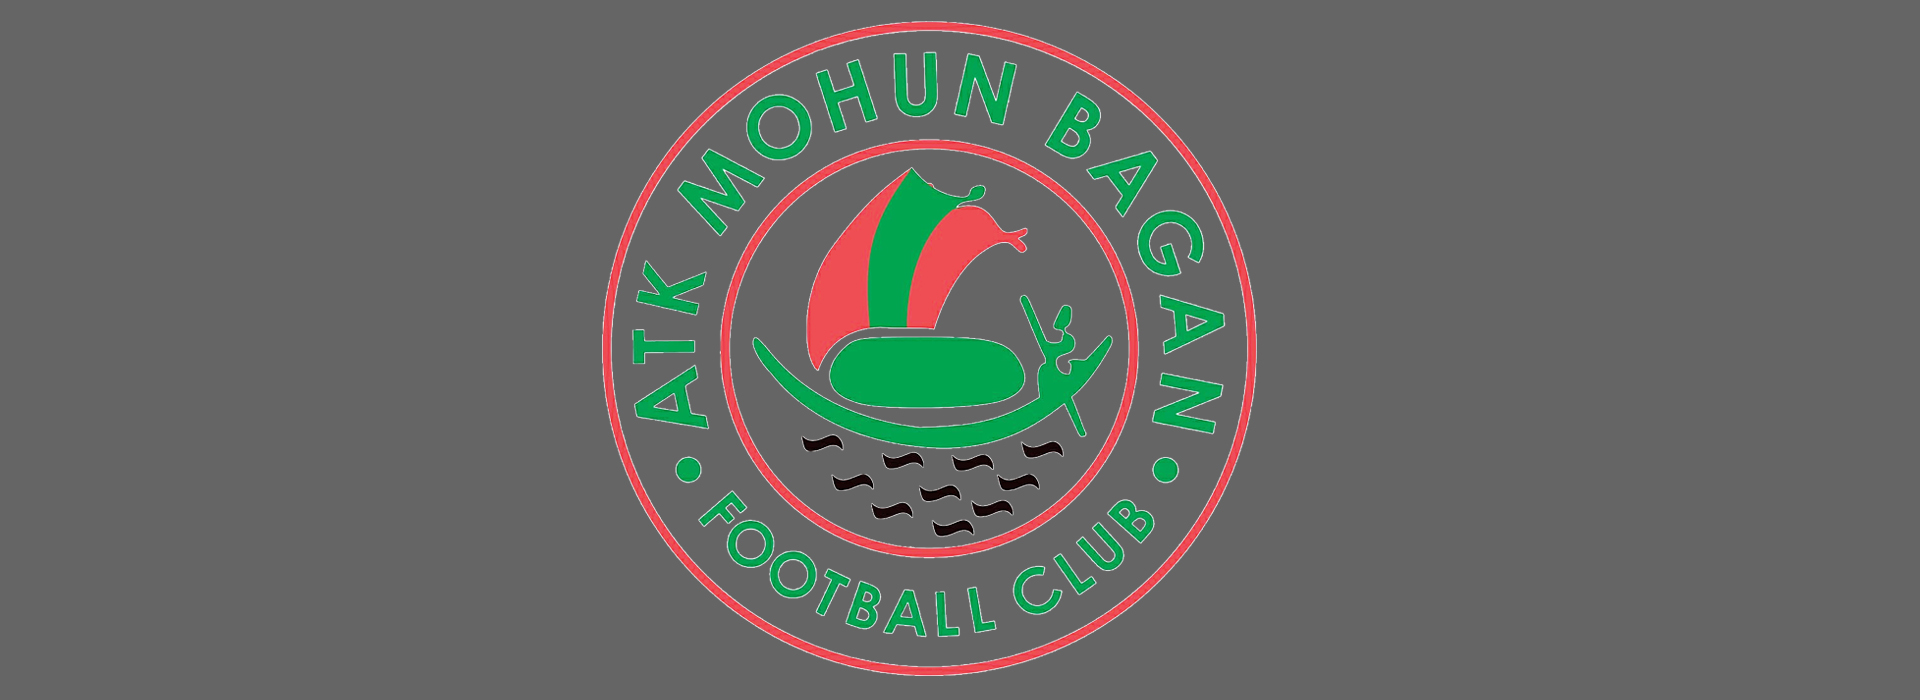 The sports division acquired a majority stake in the iconic <br/>Mohun Bagan Athletic Club, Kolkata.